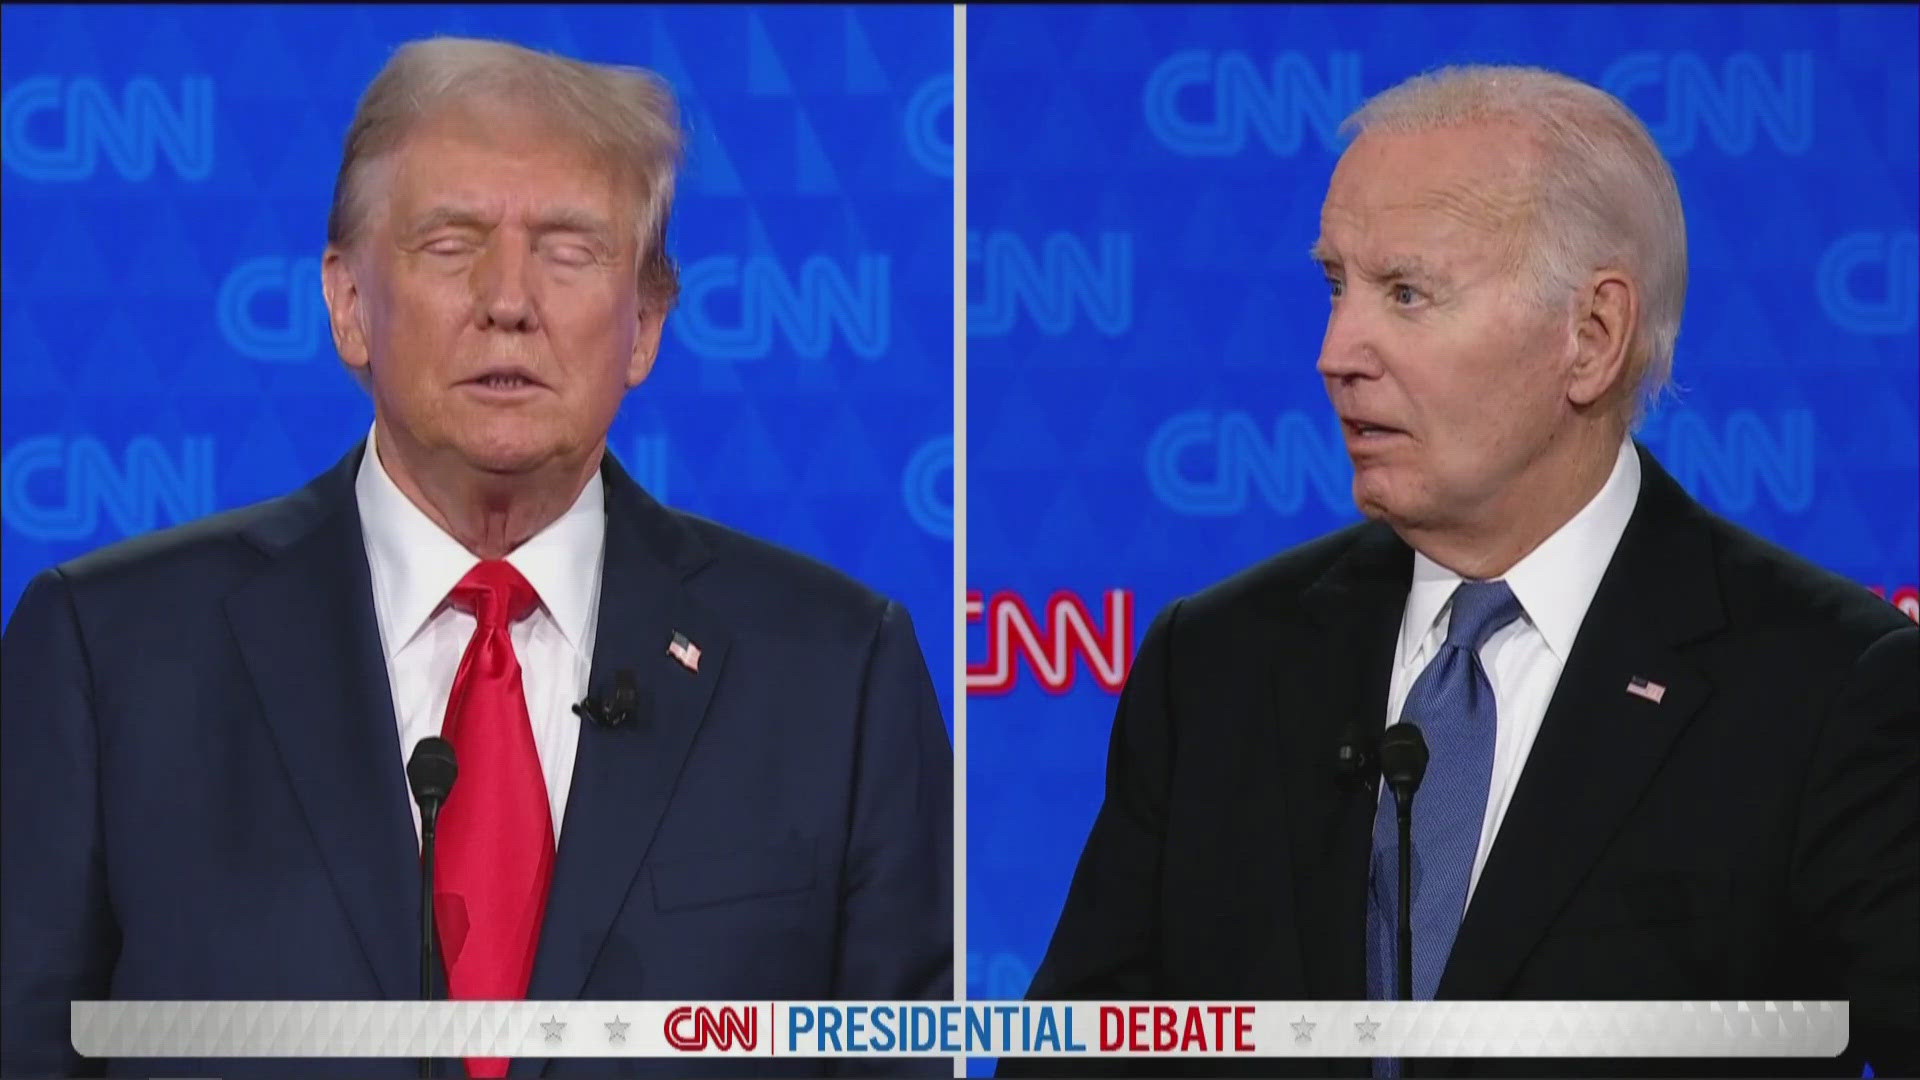 A debate over... golf broke out between Donald Trump and Joe Biden on Thursday night. It became a trending topic on the internet for many during the debate.